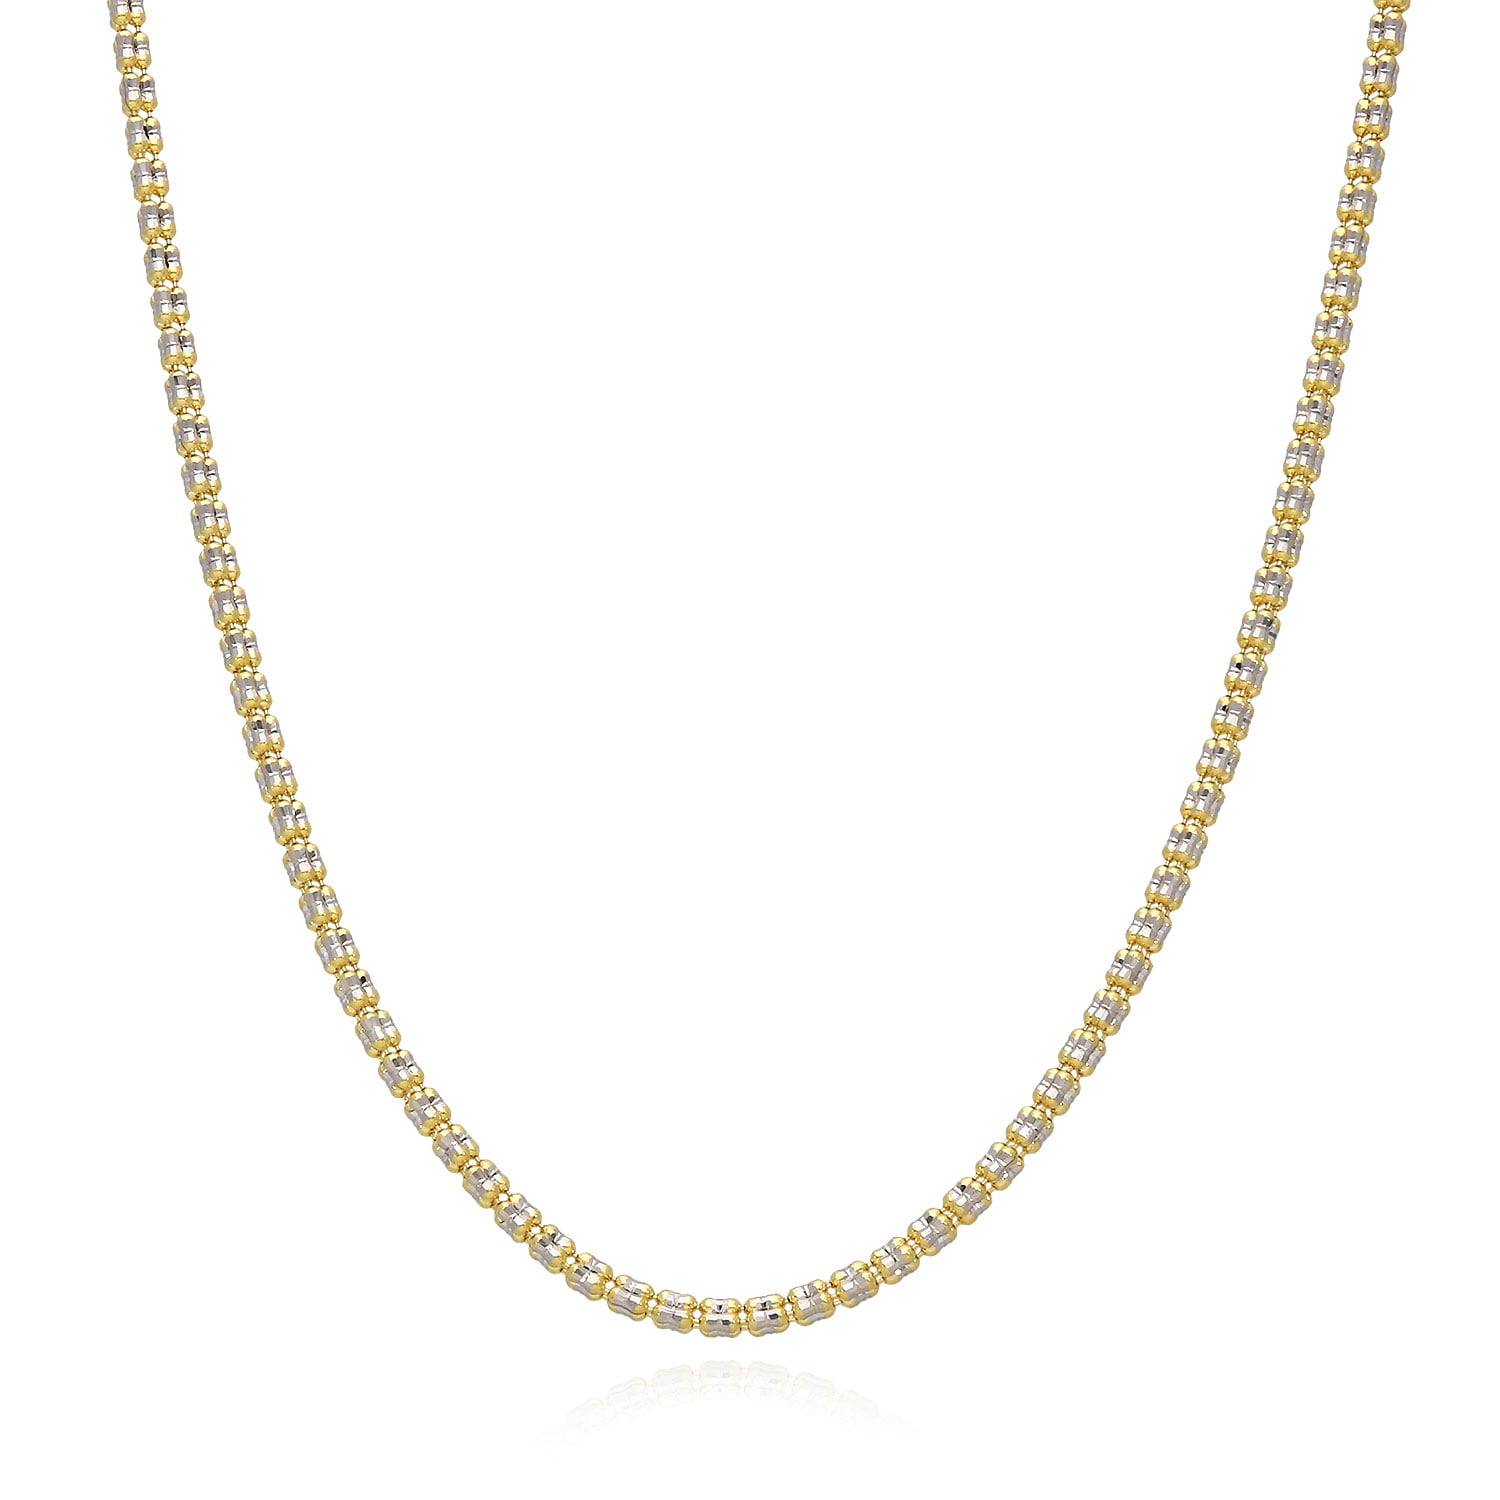 Melorra 22kt Mesh chain Gold Chains Rope Chain Yellow Gold Precious Chain  Price in India - Buy Melorra 22kt Mesh chain Gold Chains Rope Chain Yellow  Gold Precious Chain online at Flipkart.com